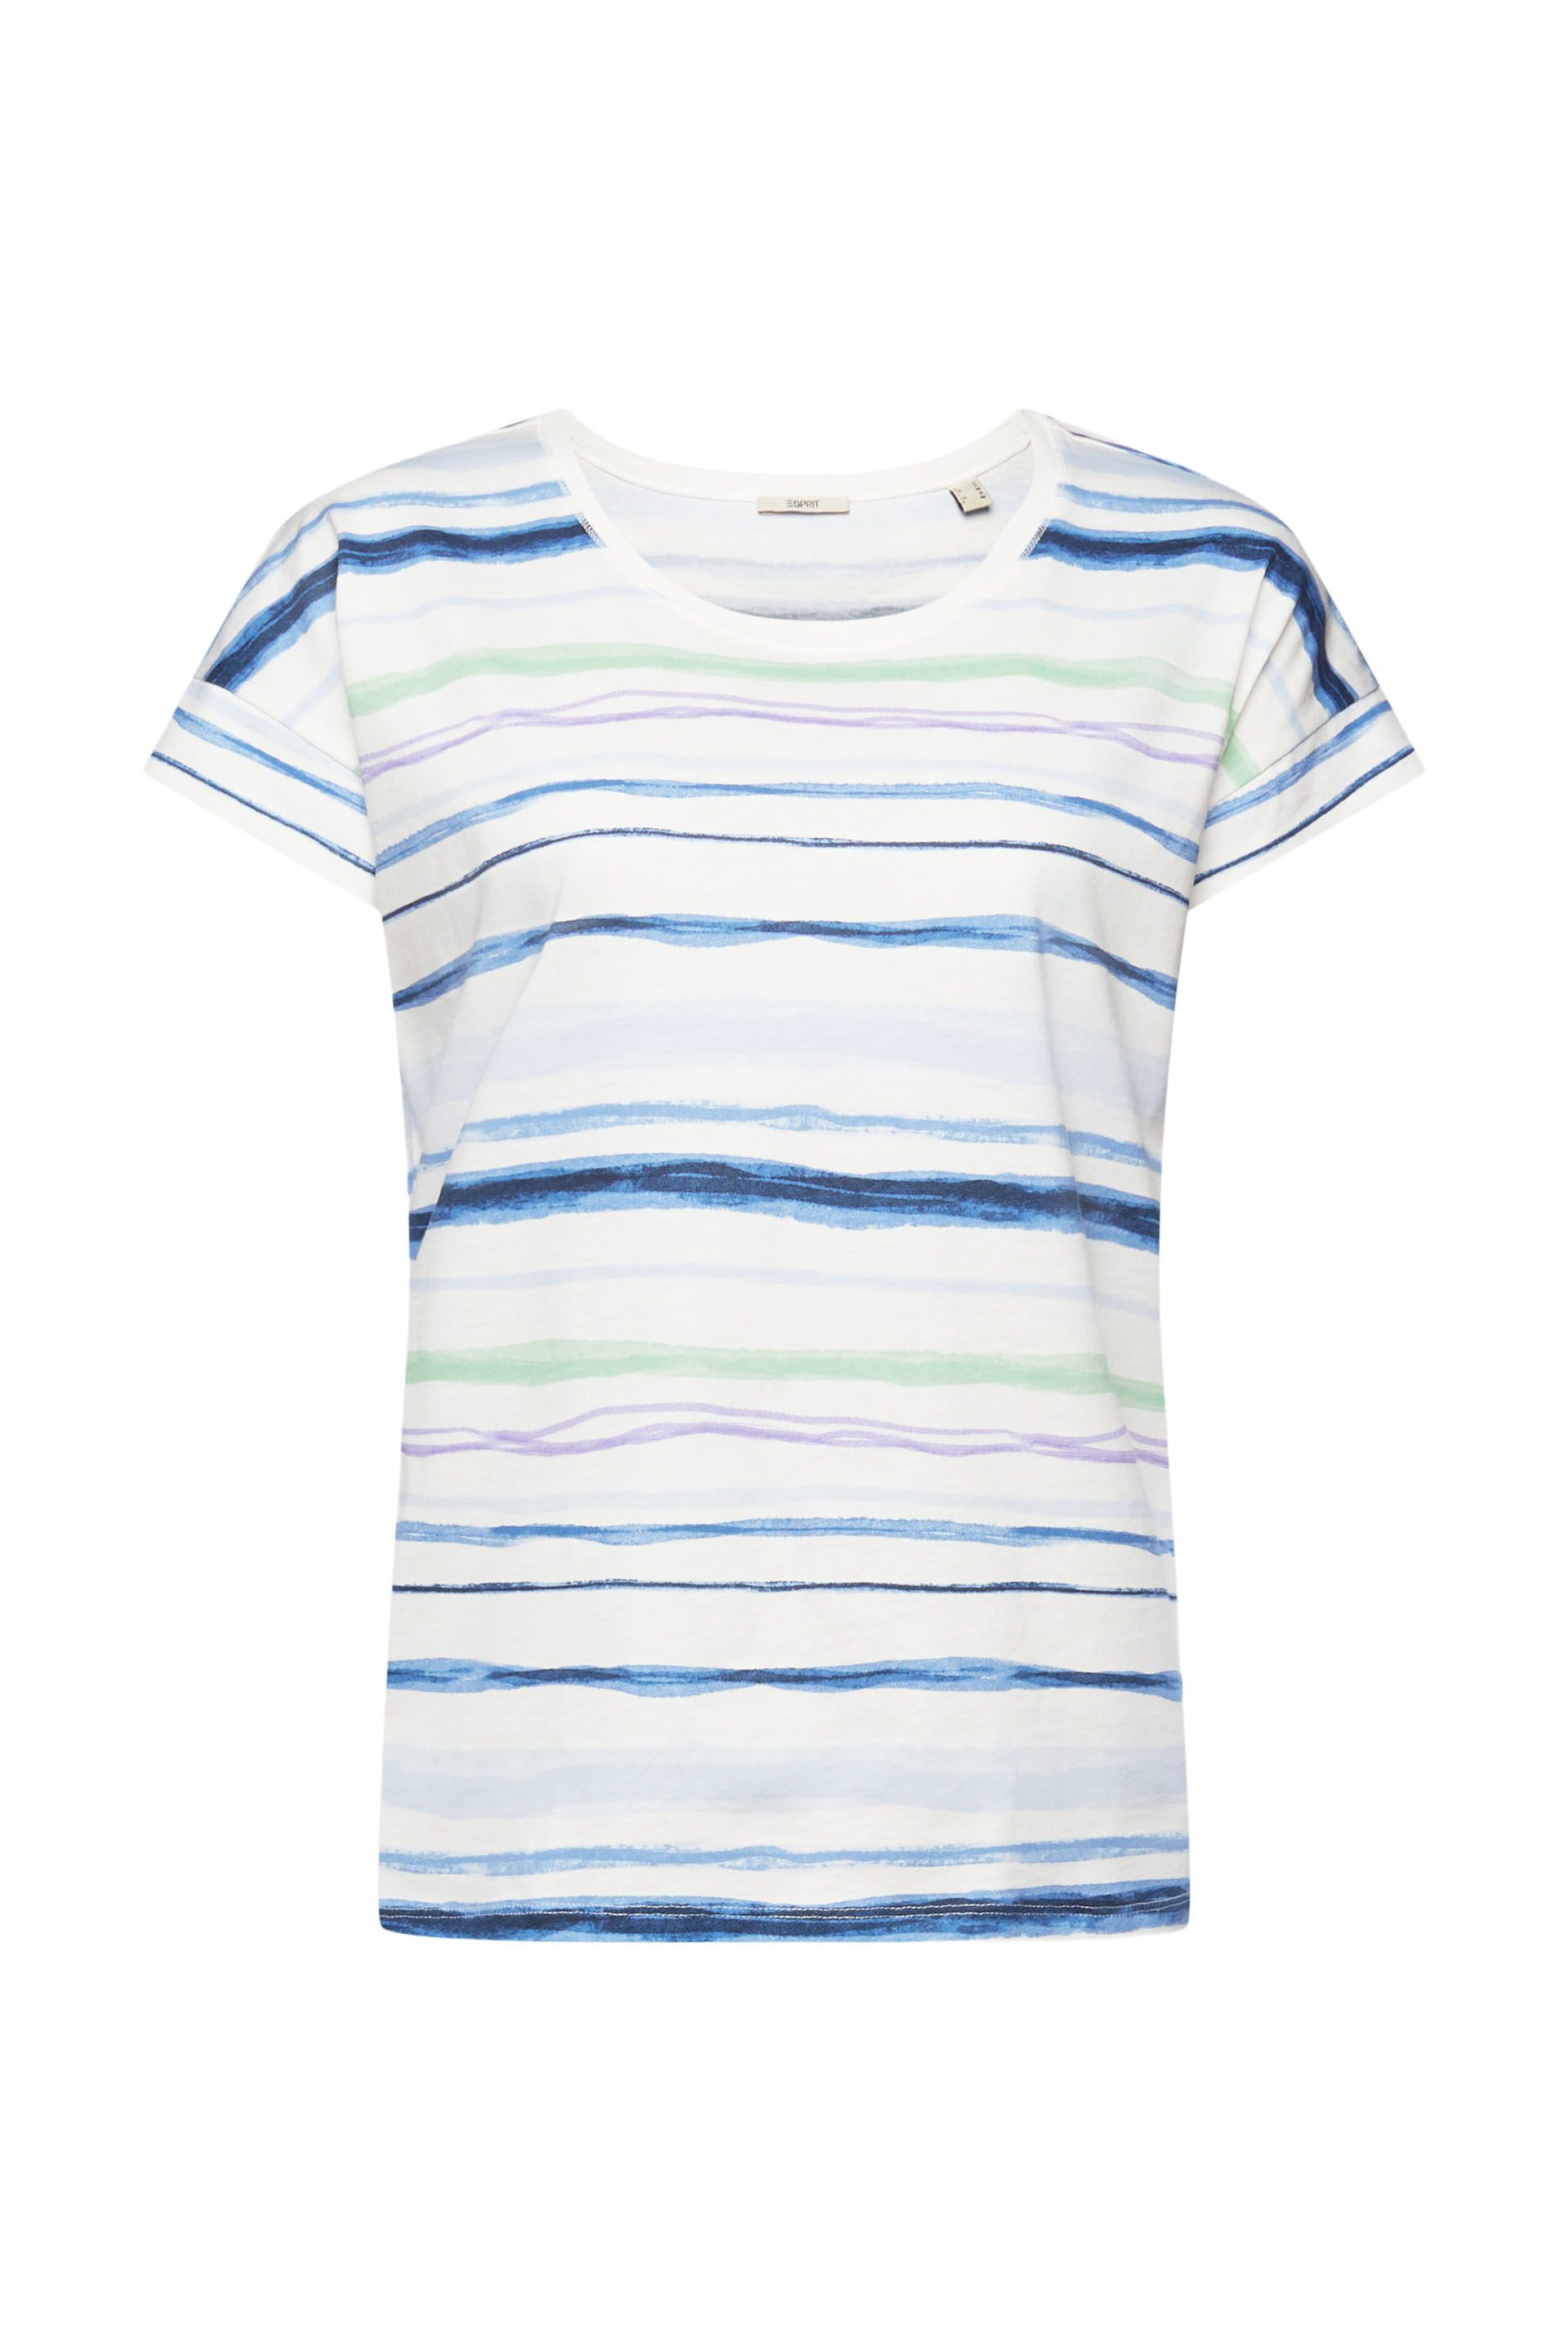 Esprit - T-shirt a righe in cotone, Blu, large image number 0